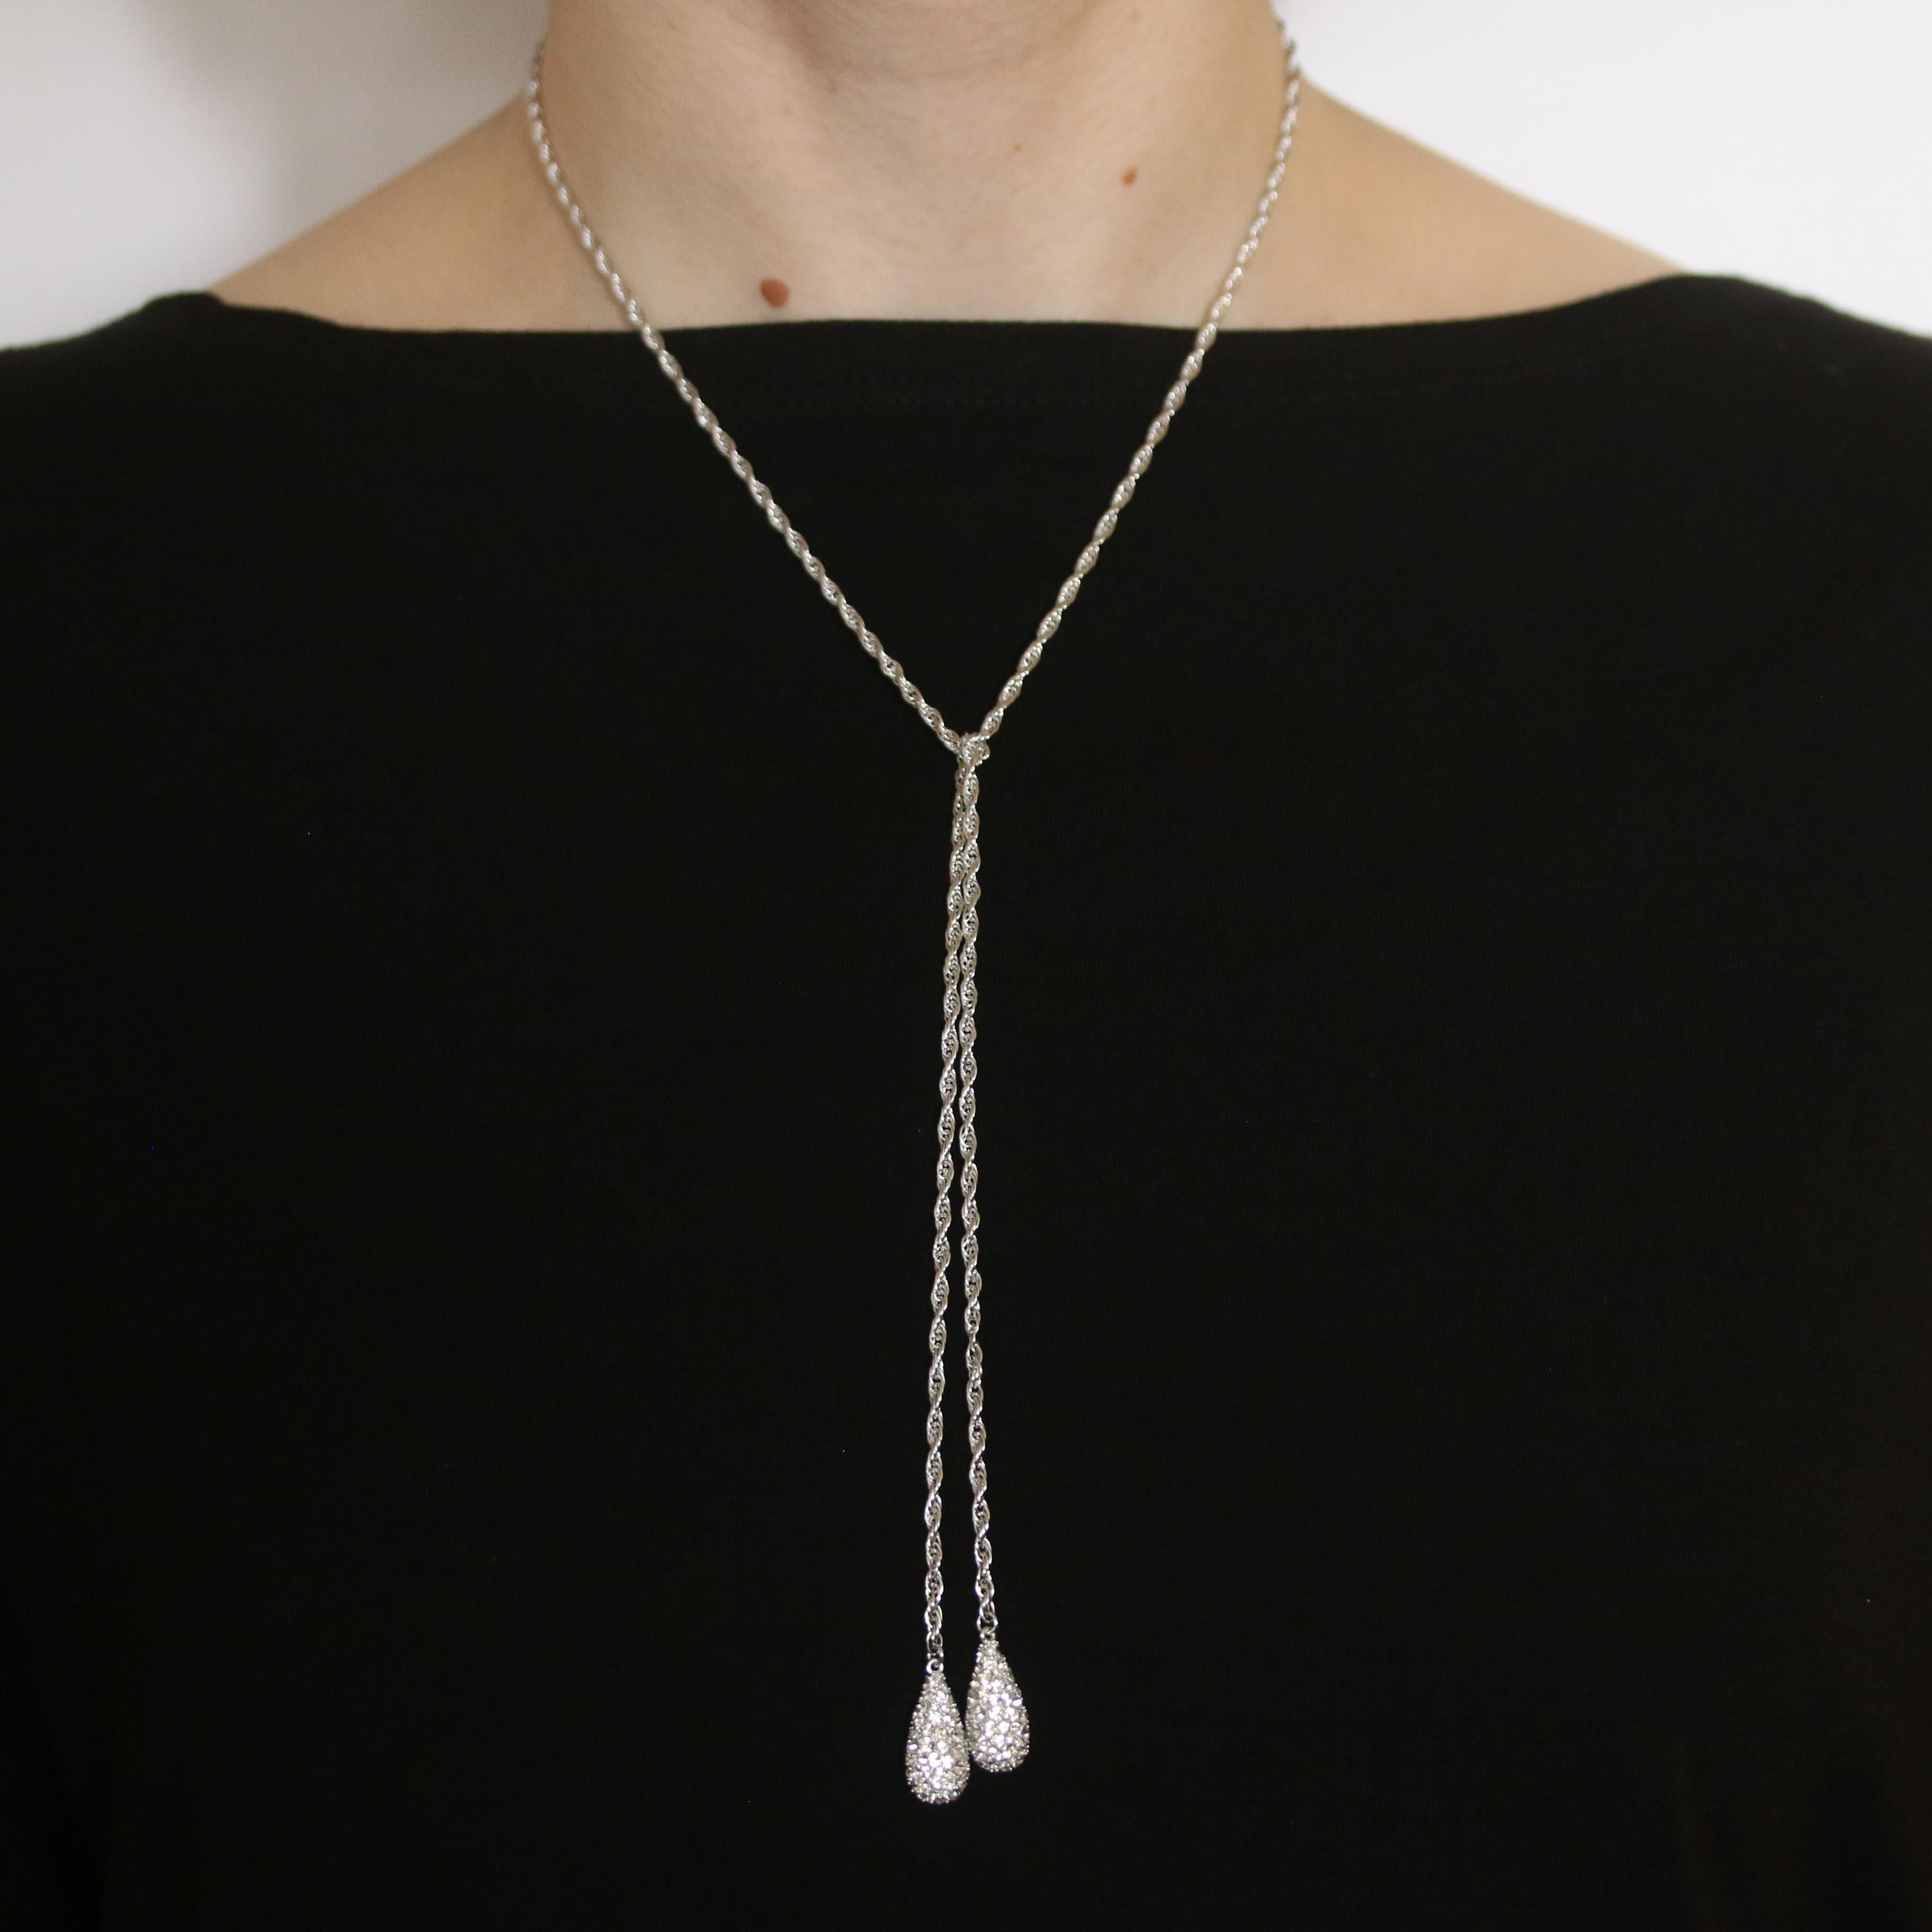 This beautiful necklace would make a perfect addition to your collection! We recently bought out a jewelry store that was an authorized Chamilia dealer, and this piece is guaranteed NEW and 100% authentic. The sterling silver piece is titled Tie